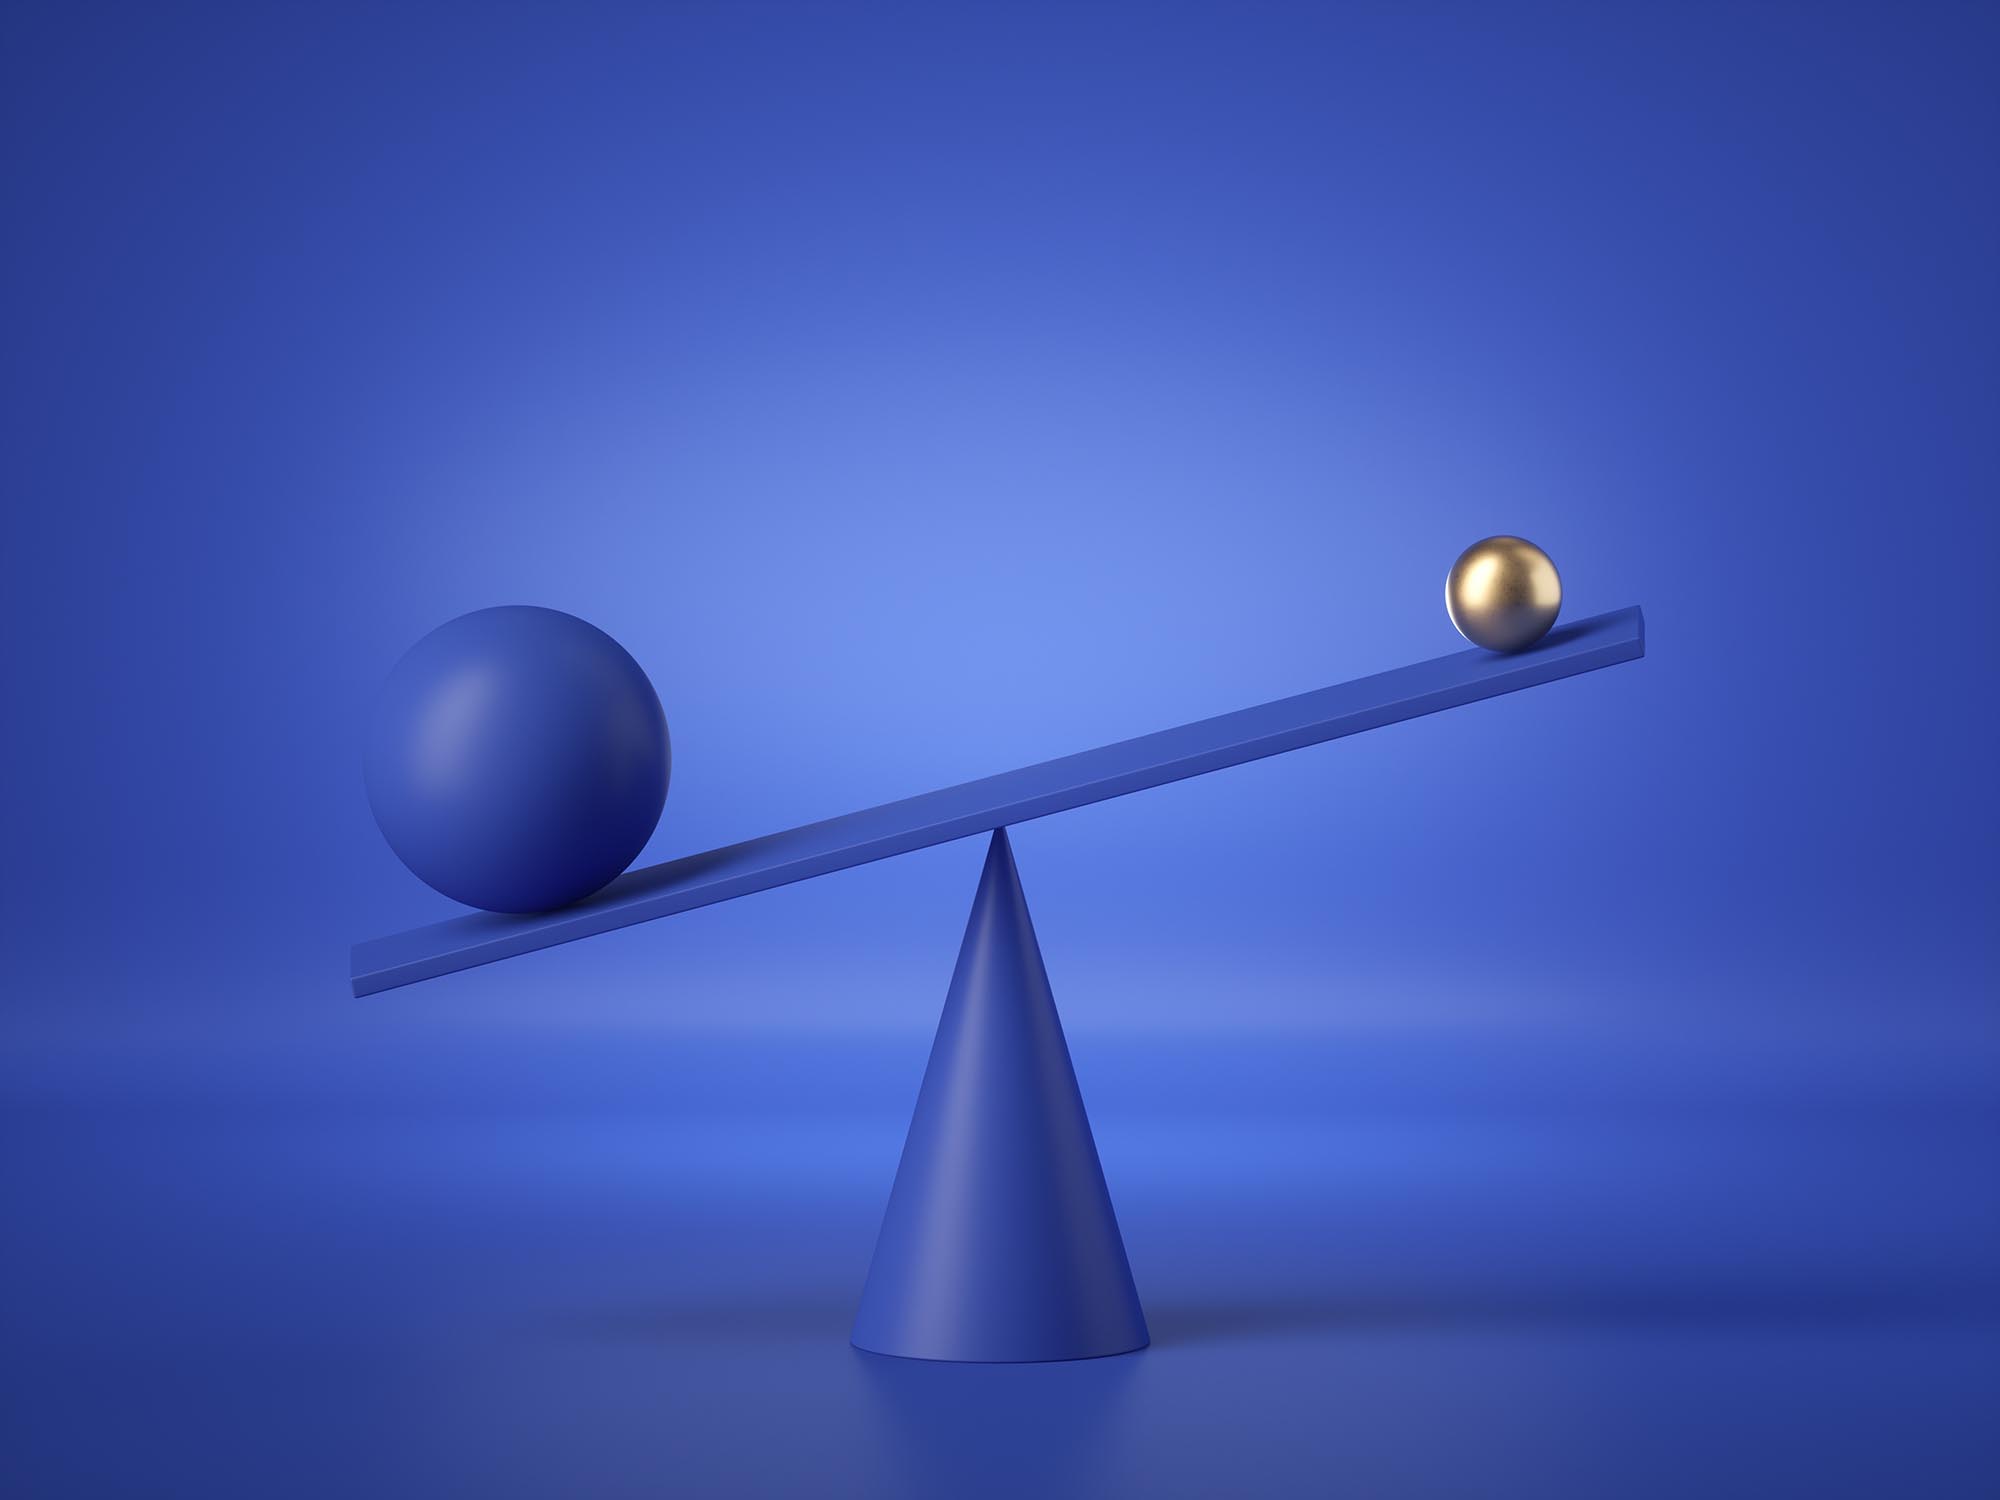 balancing blue and gold balls placed on weighing scales, abstract geometric primitive shapes isolated on blue background